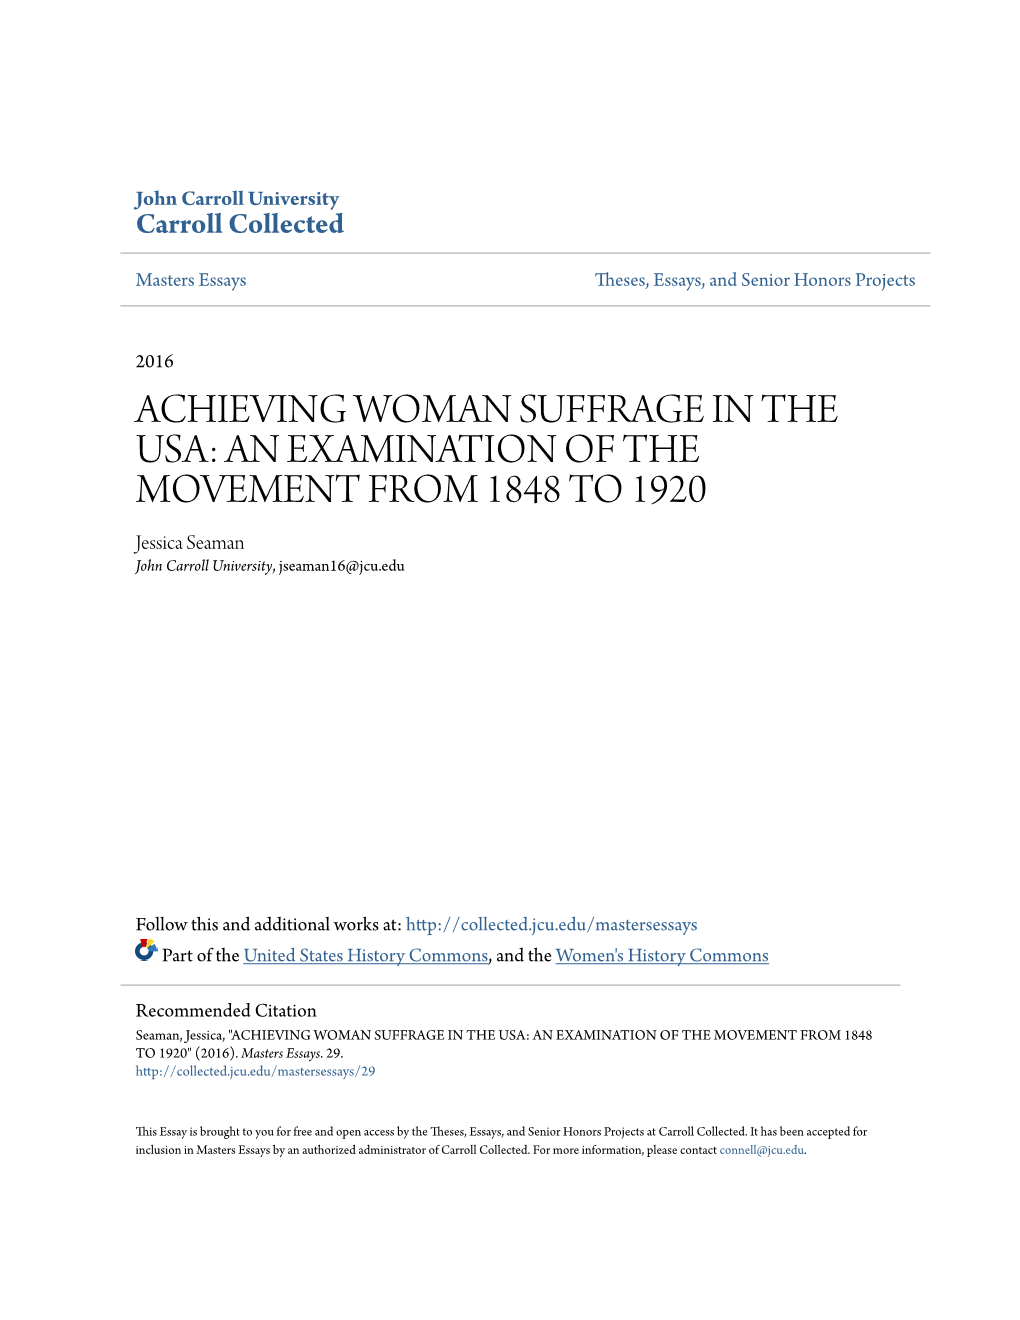 ACHIEVING WOMAN SUFFRAGE in the USA: an EXAMINATION of the MOVEMENT from 1848 to 1920 Jessica Seaman John Carroll University, Jseaman16@Jcu.Edu